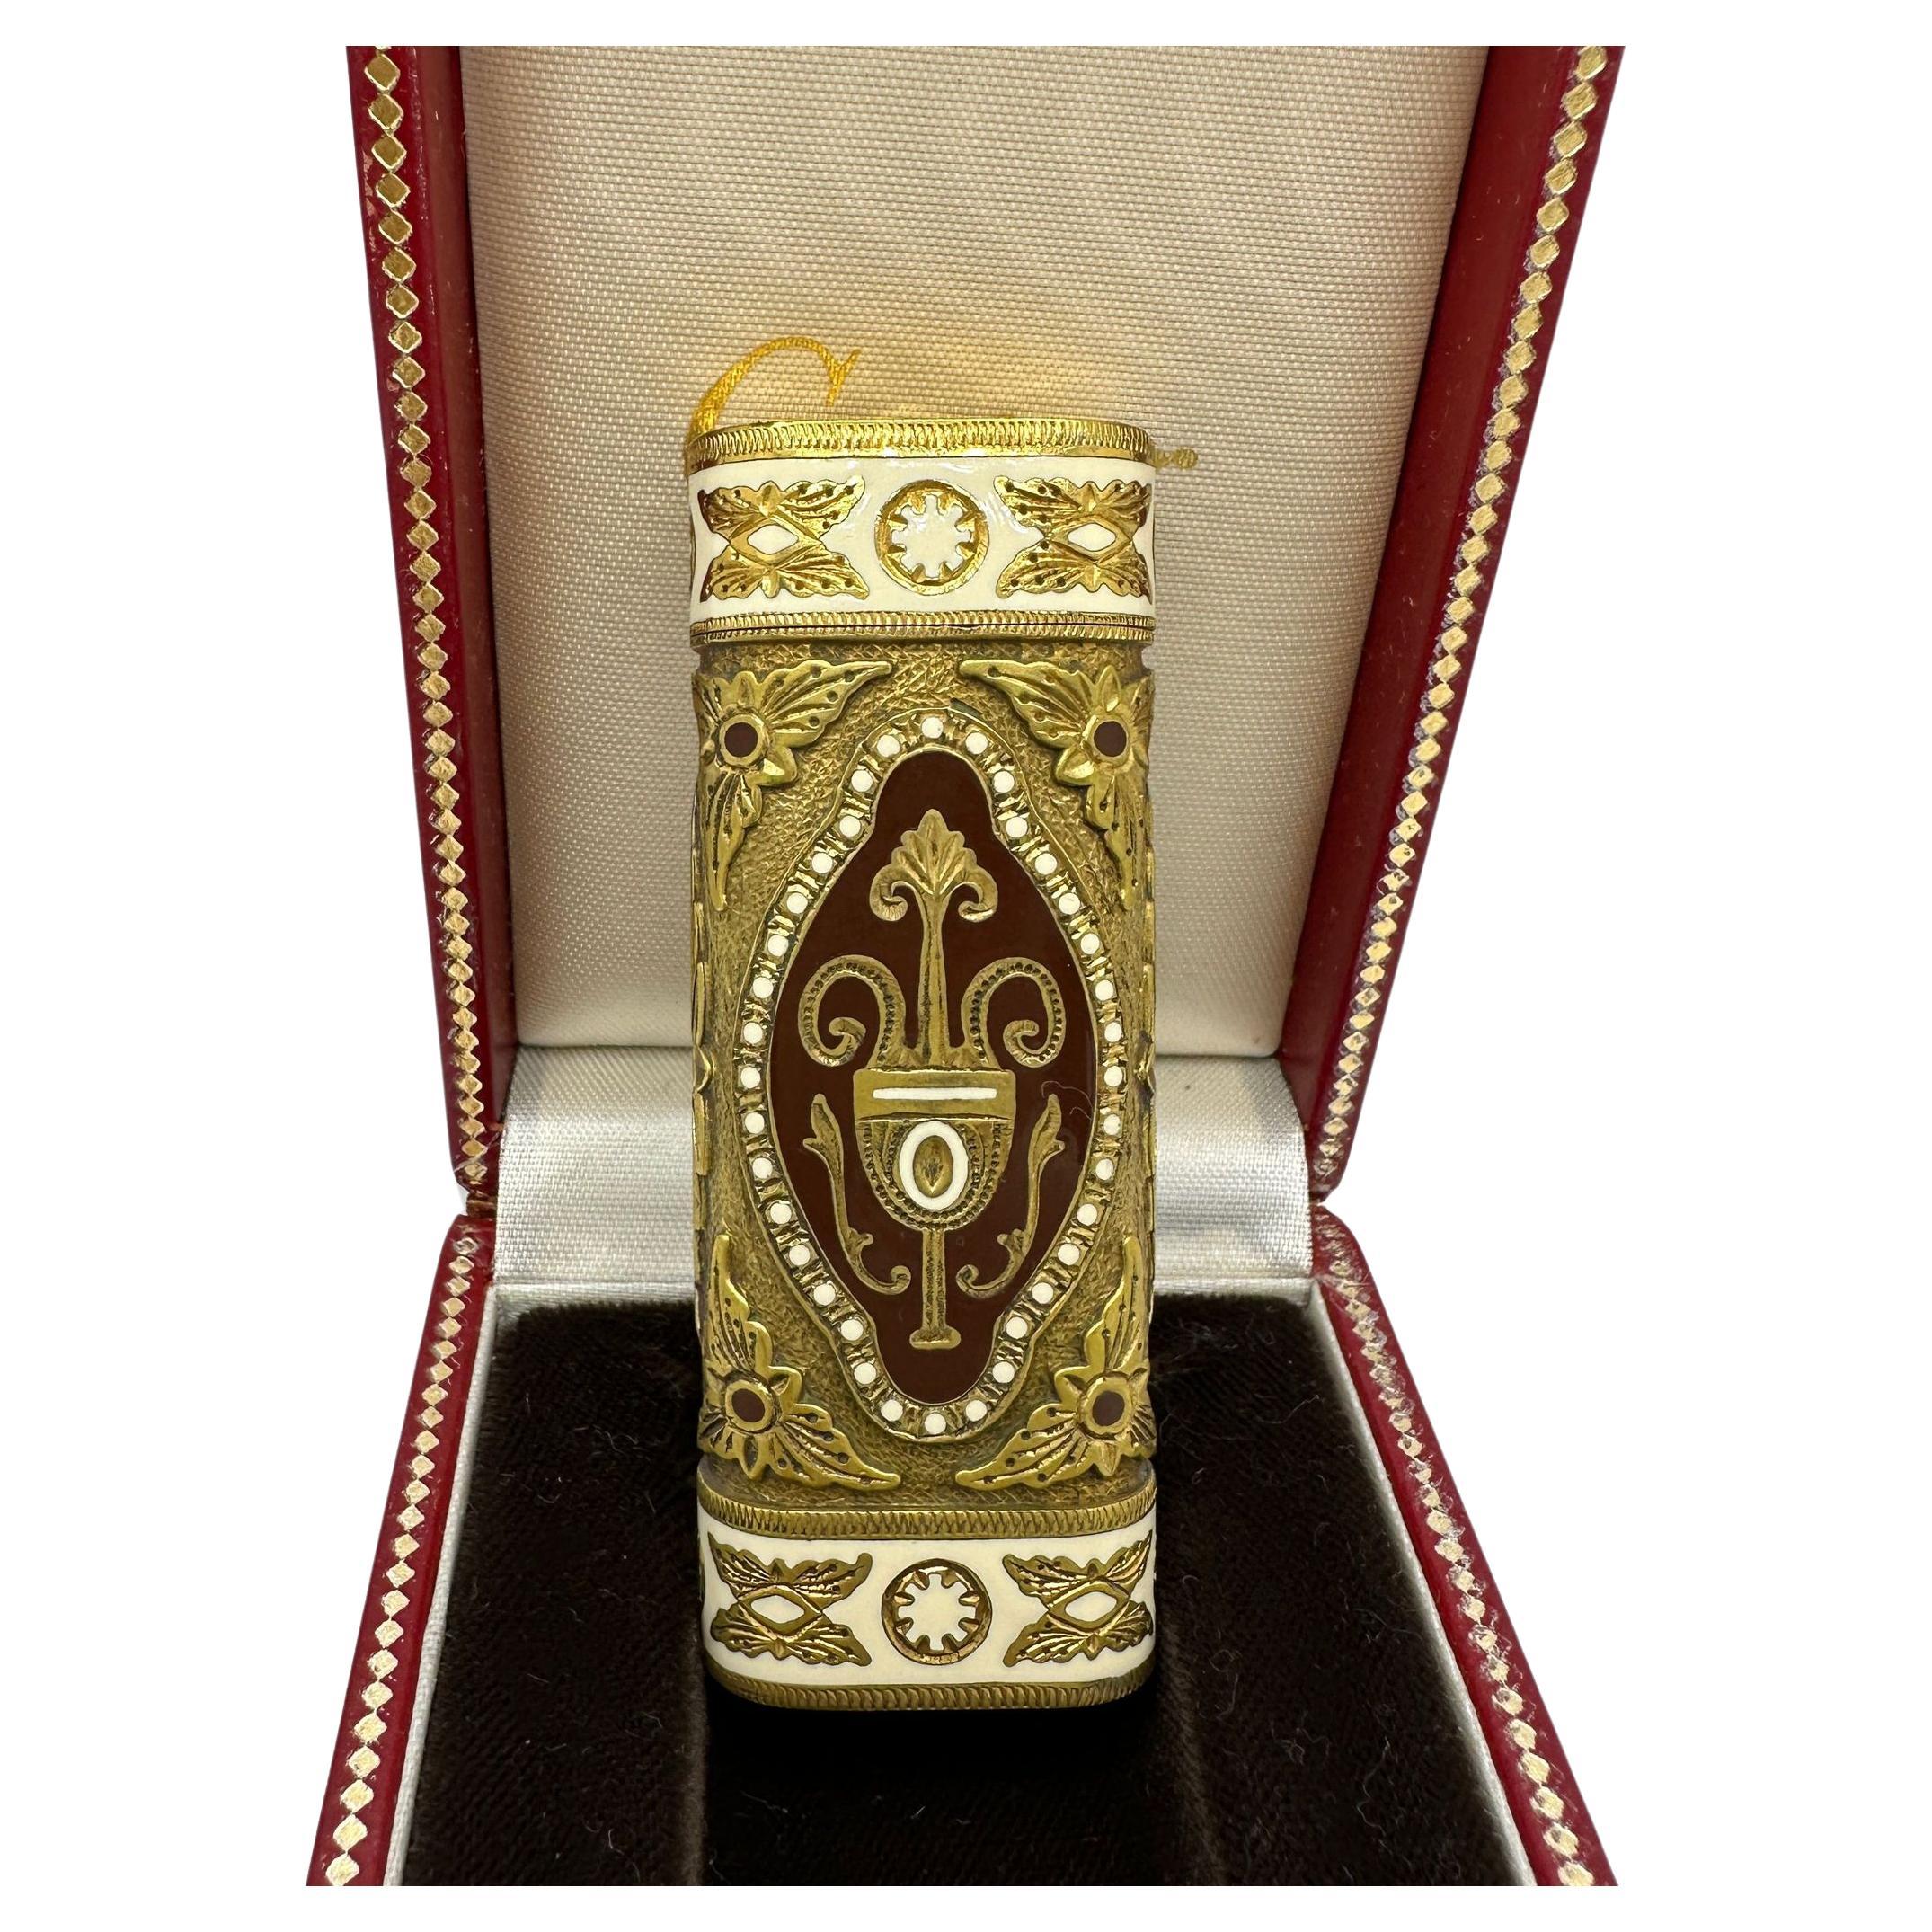 Le Must de Cartier Very Rare Royking Lighter, 18k Gold Plating & Enamel Inlay  For Sale